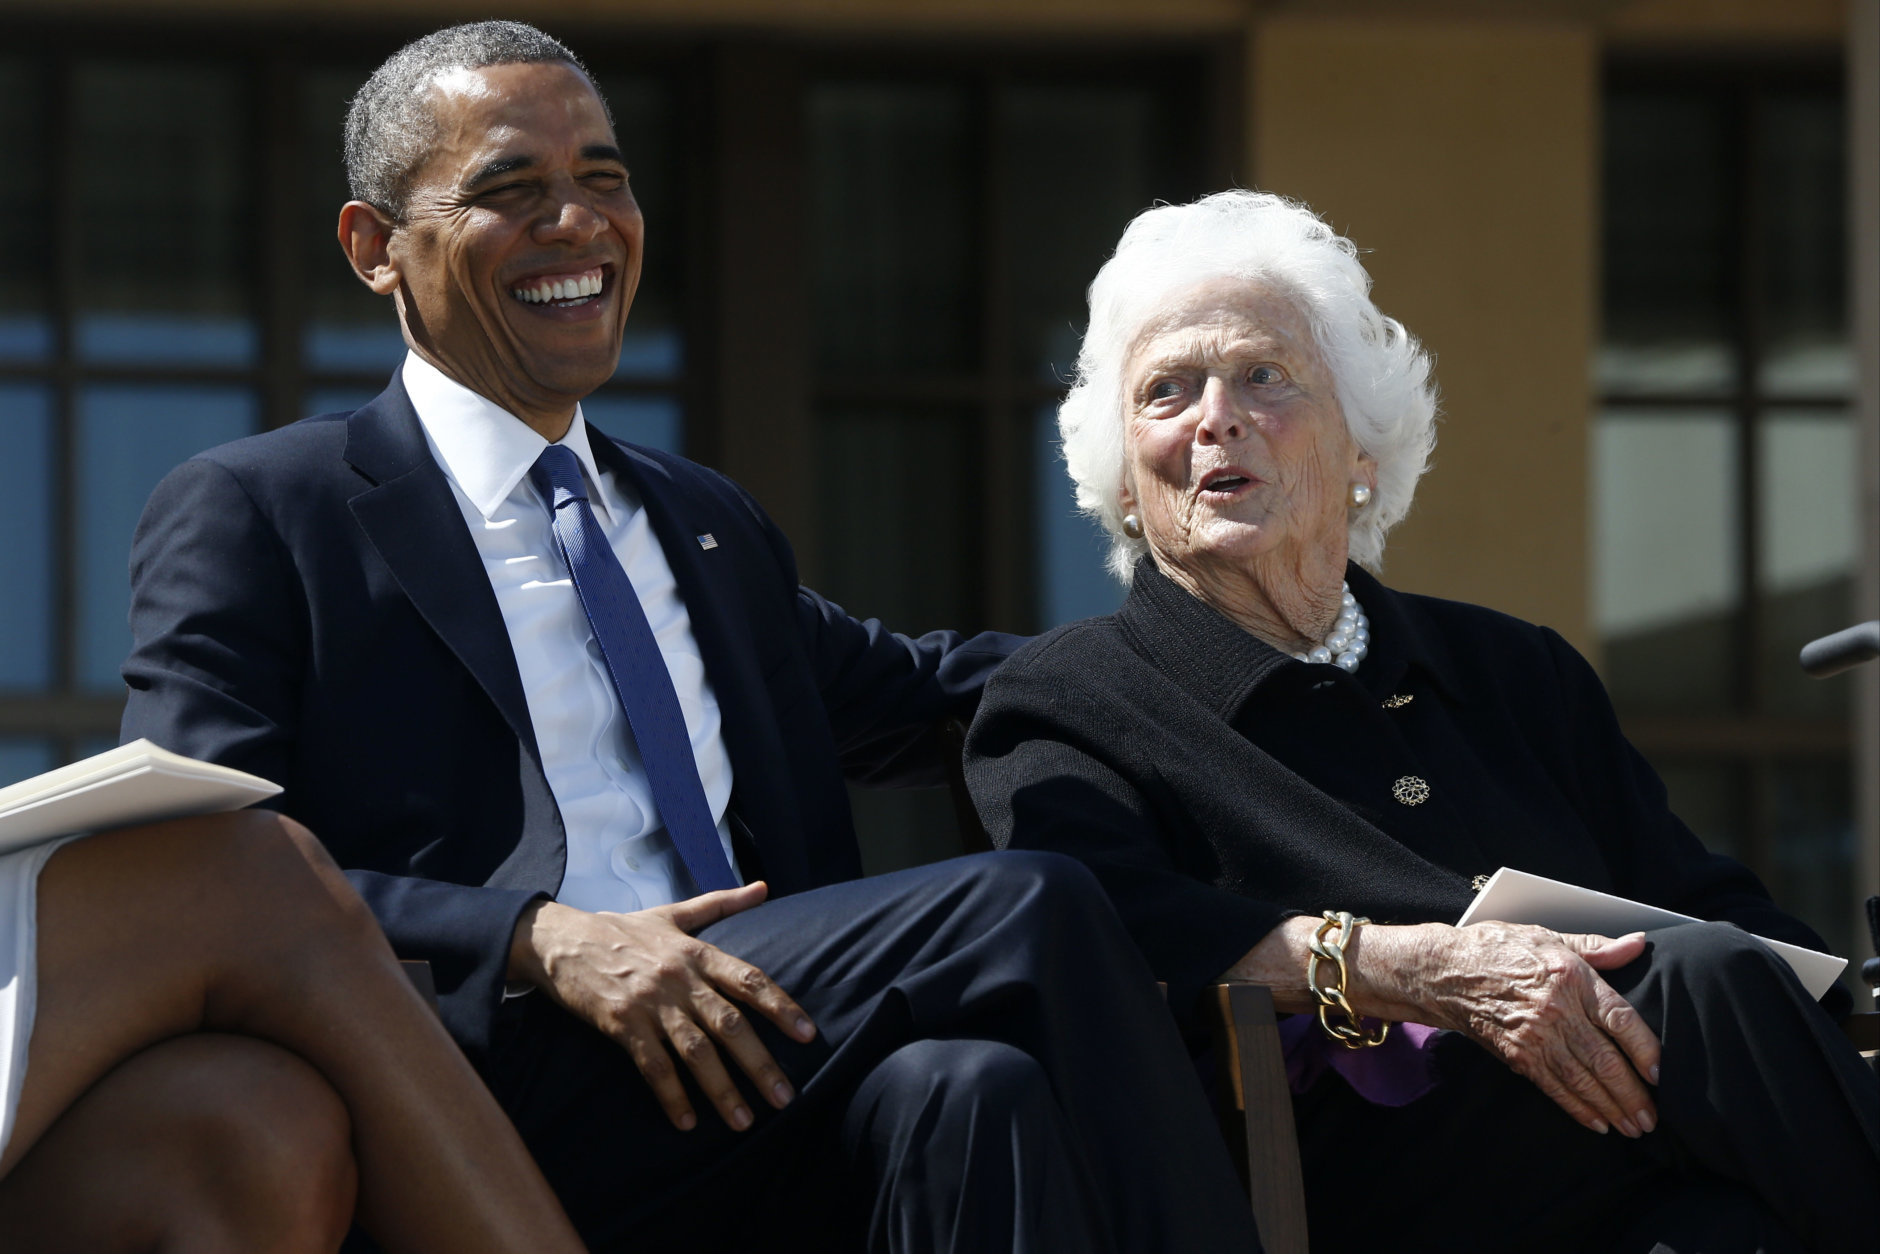 President Barack Obama shares a laugh with former first lady Barbara Bush at the dedication of the George W. Bush presidential library on the campus of Southern Methodist University in Dallas, Thursday, April 25, 2013. (AP Photo/Charles Dharapak)